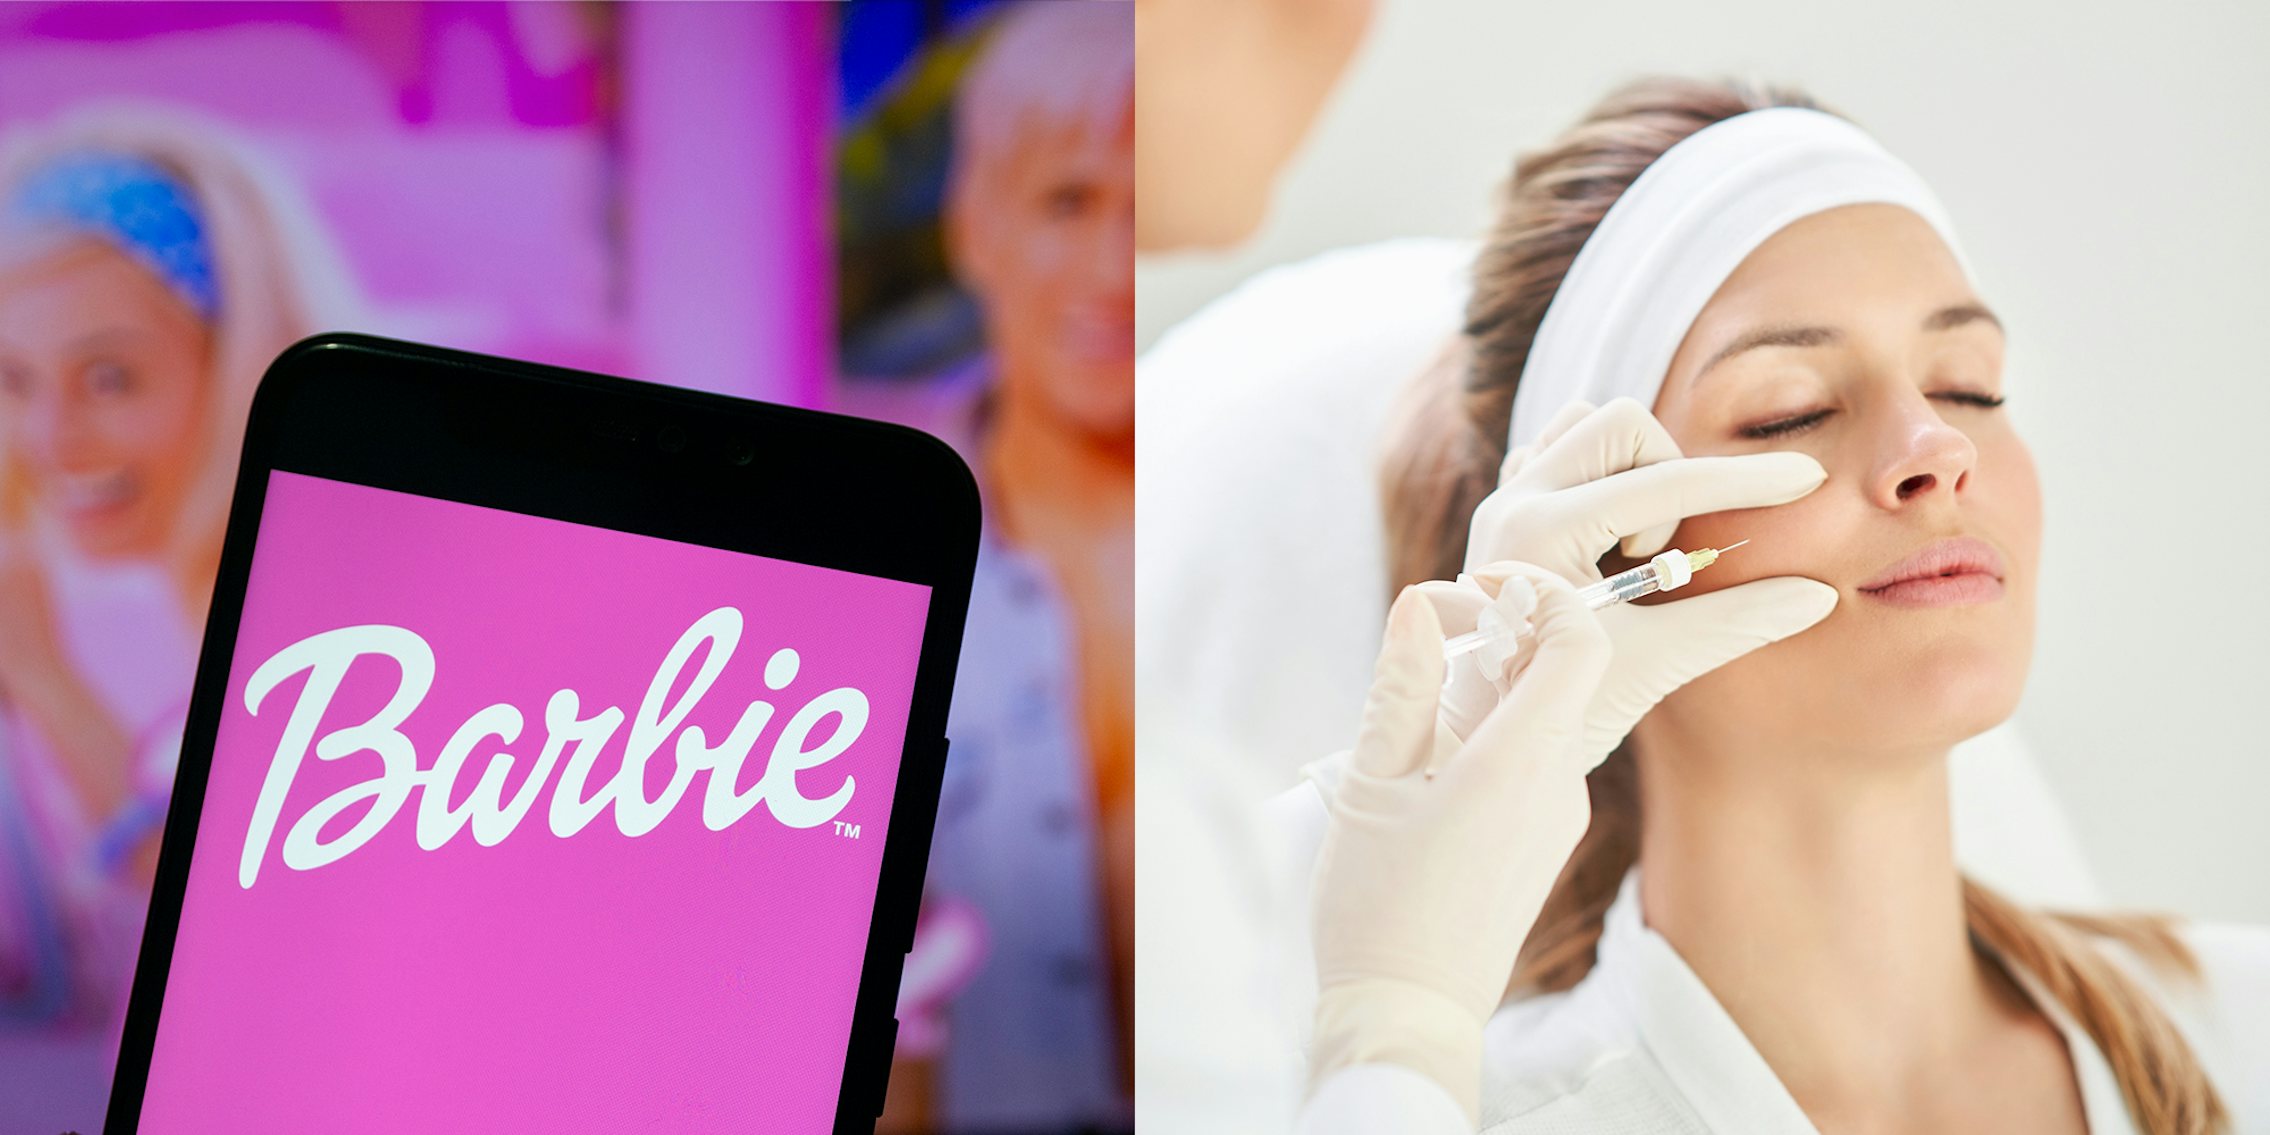 Botox package deals have Barbie-themed names